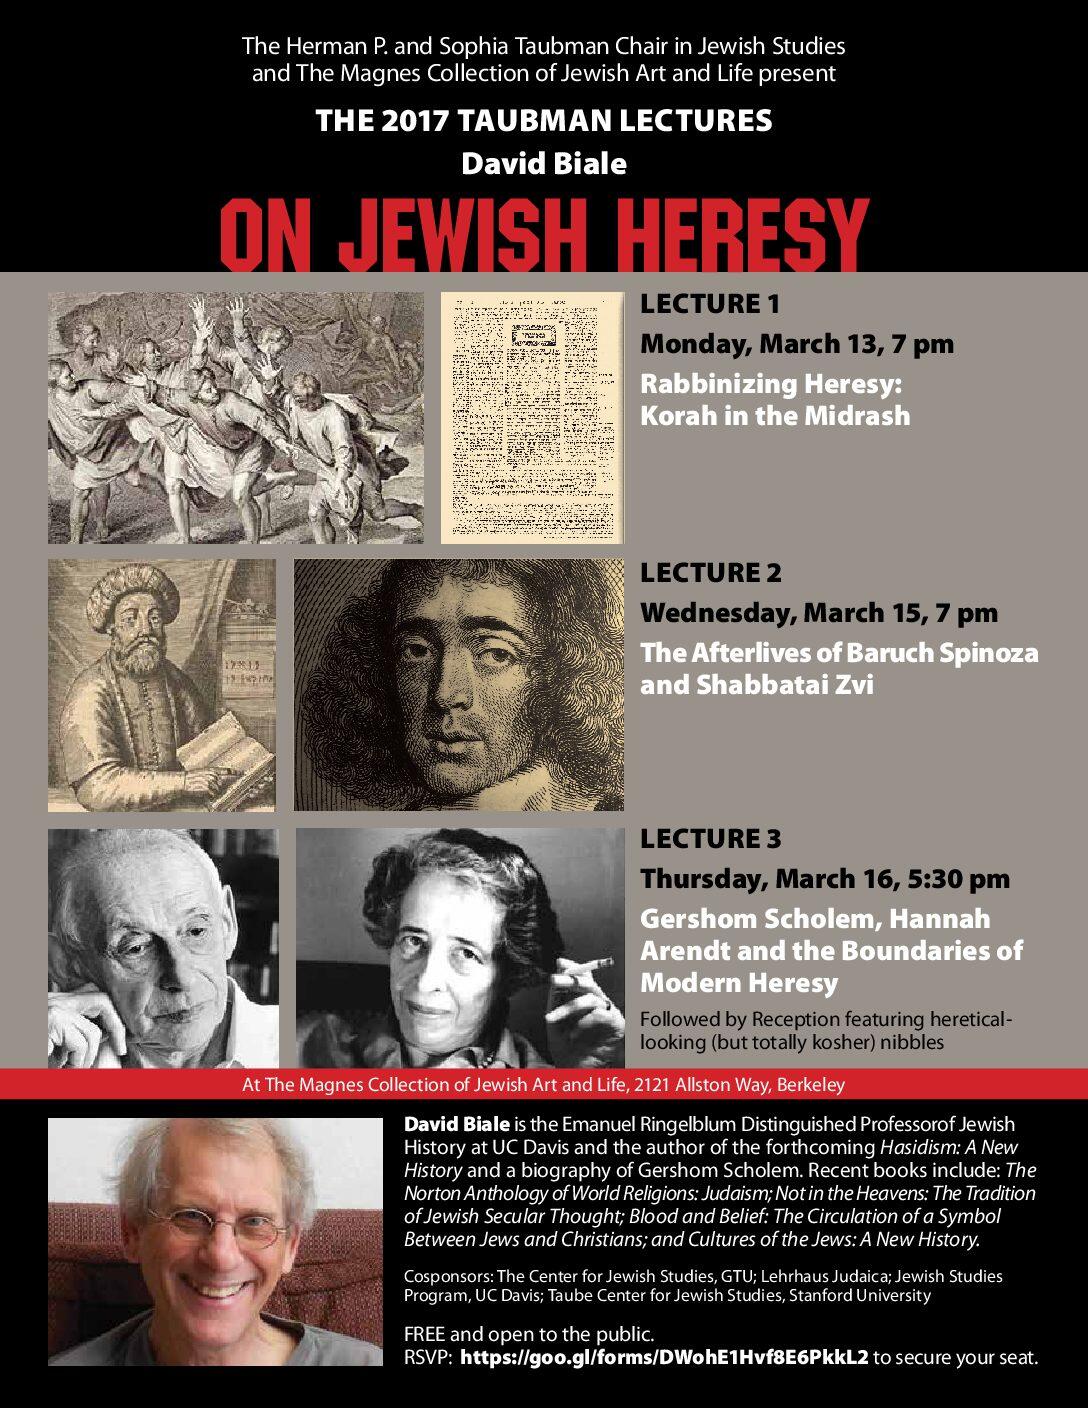 On Jewish Heresy Lecture 3